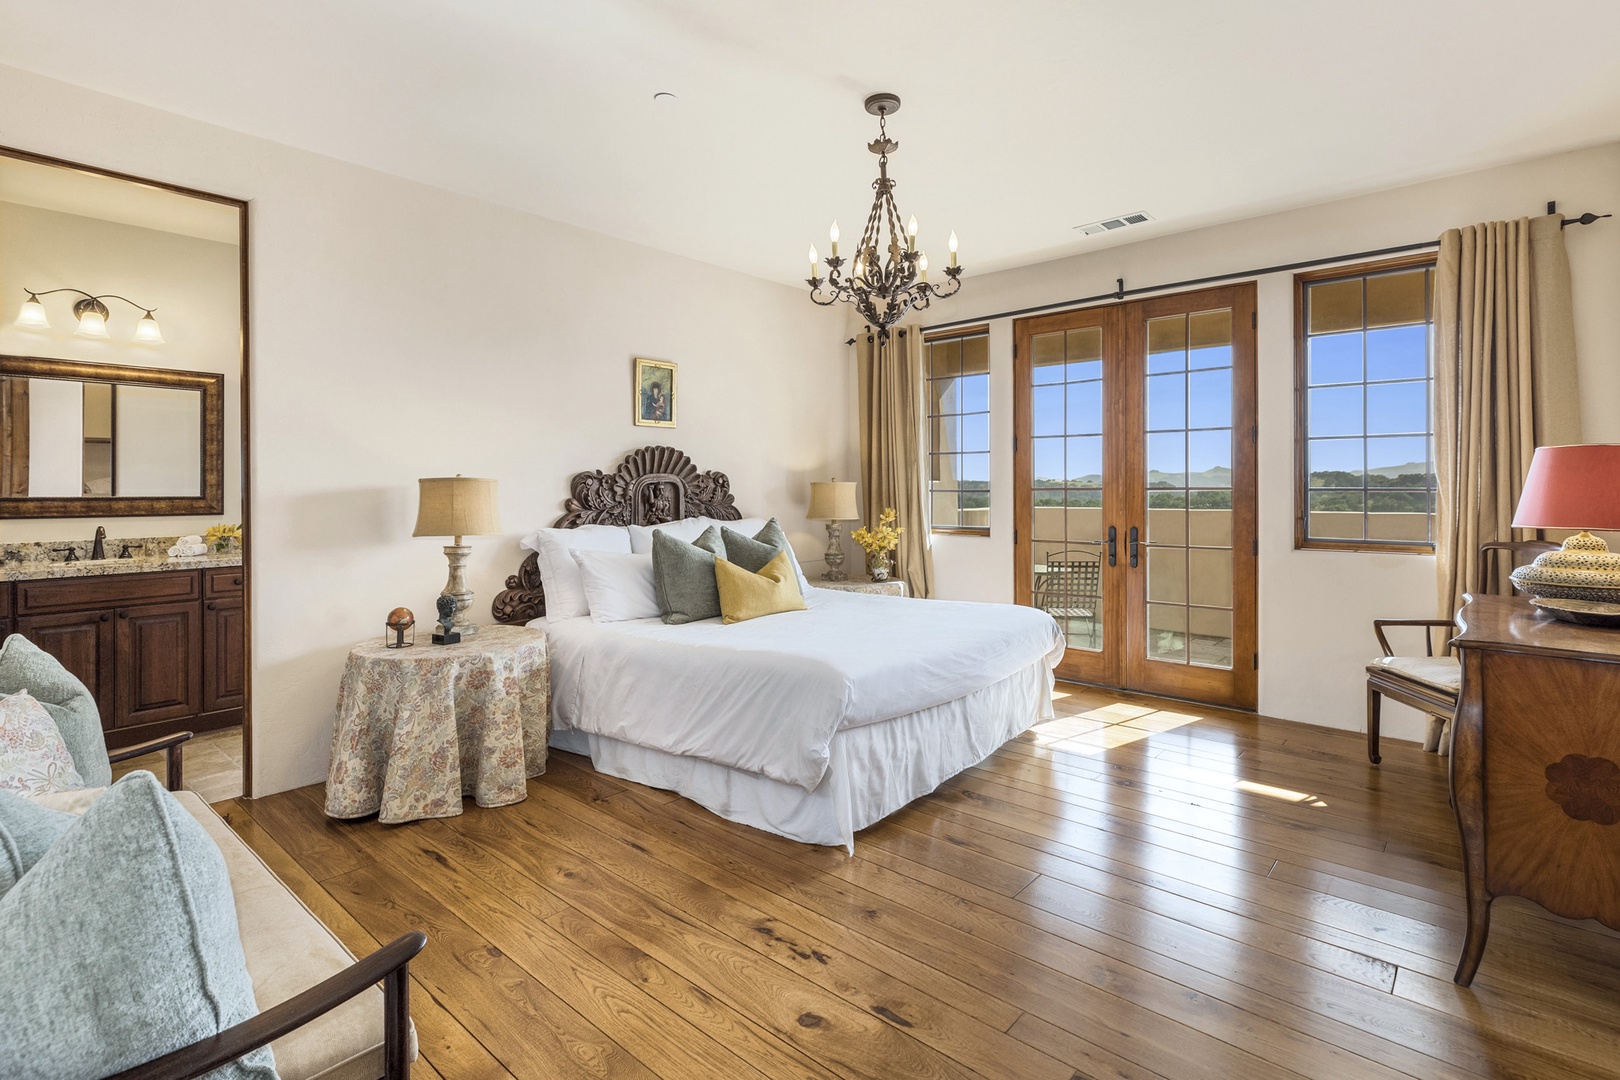 Fairfield Vacation Rentals, Villa Capricho - Guest Bedroom with King Bed